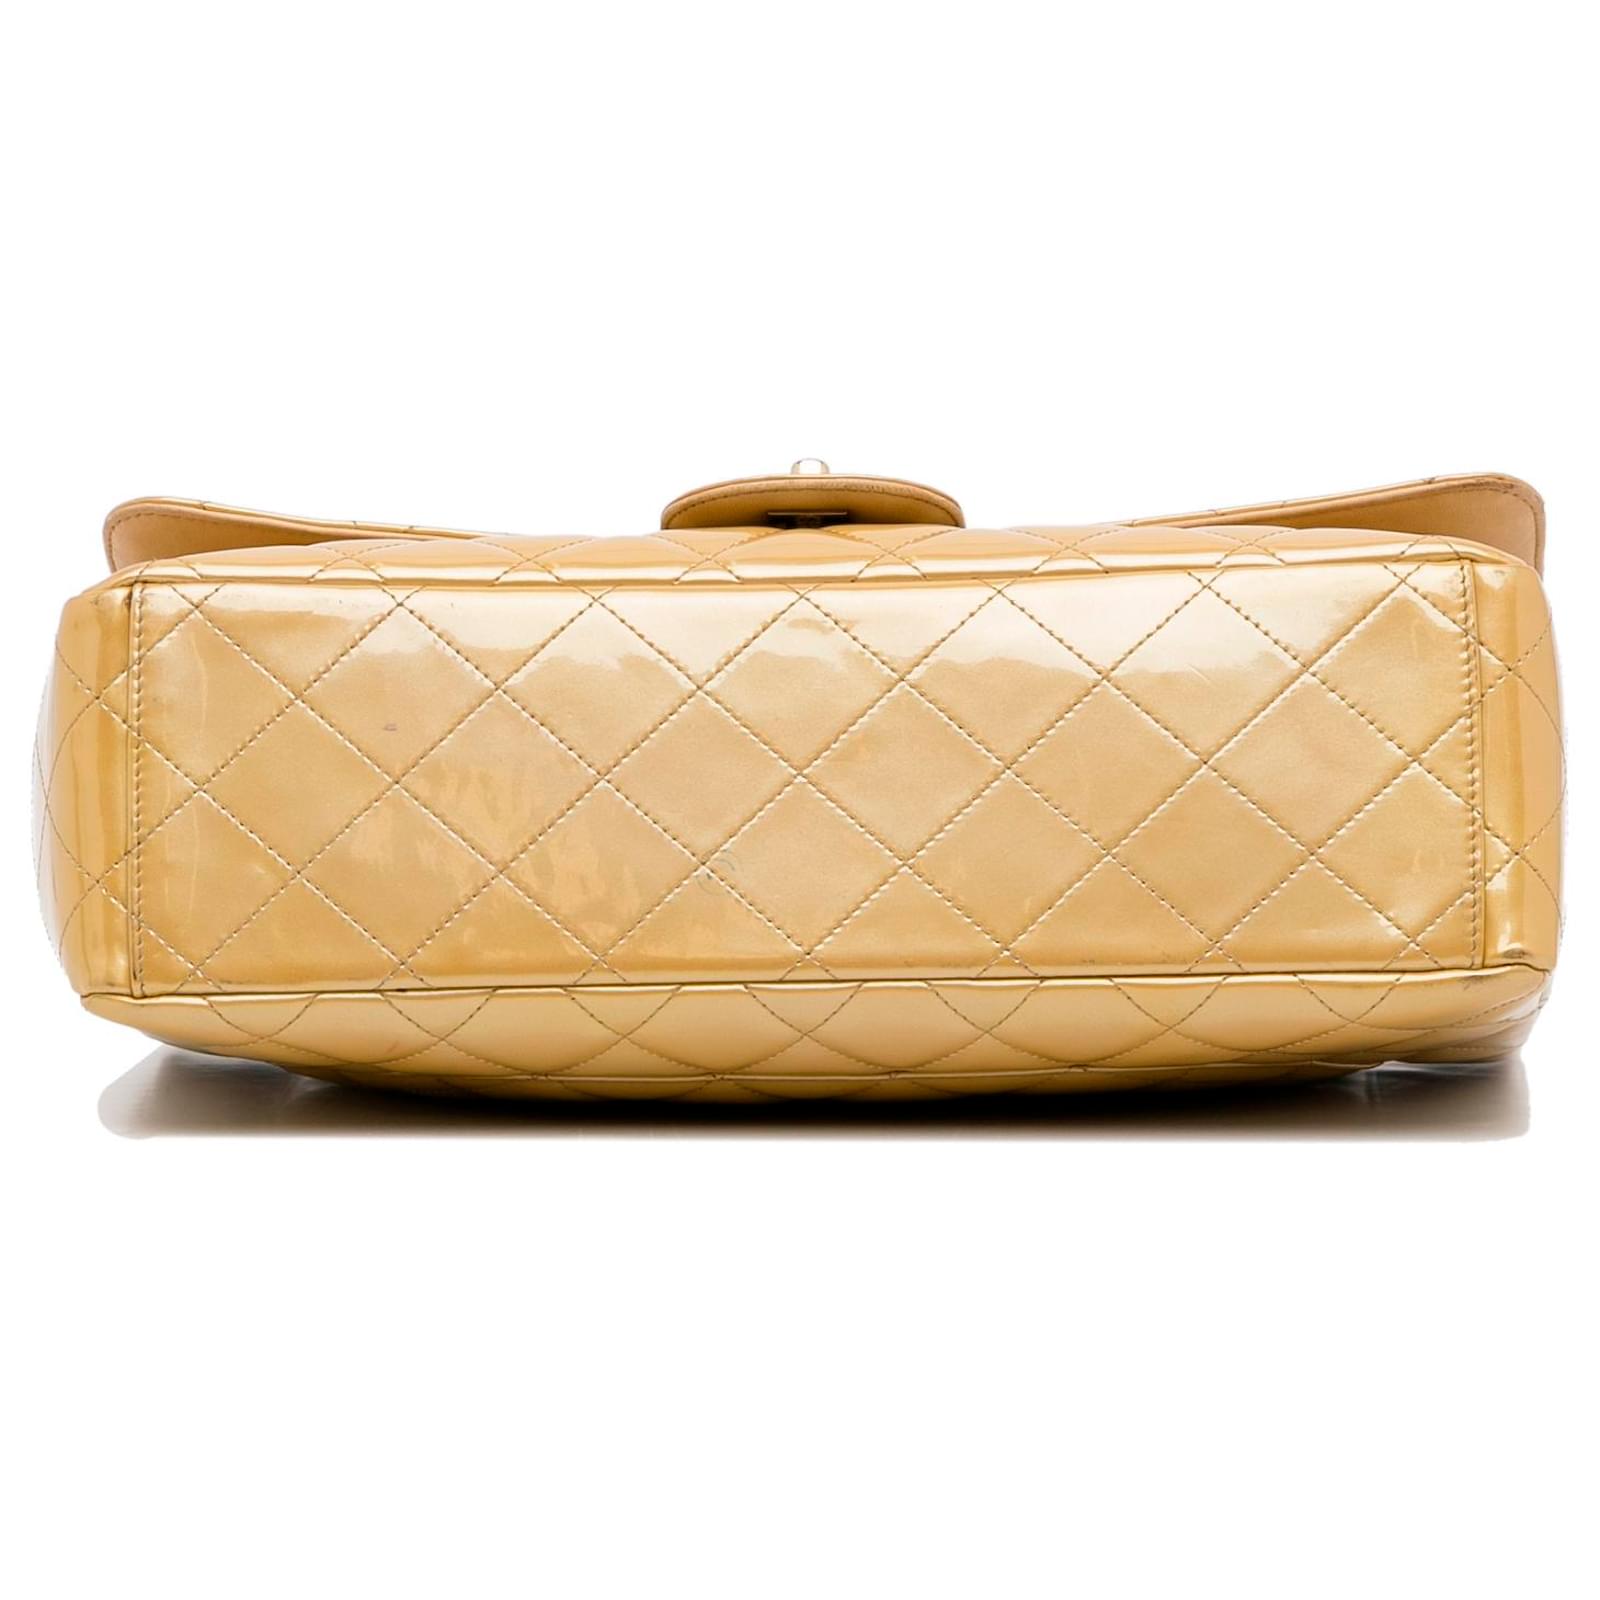 Chanel Gold Maxi Classic Patent Single Flap Golden Leather Patent